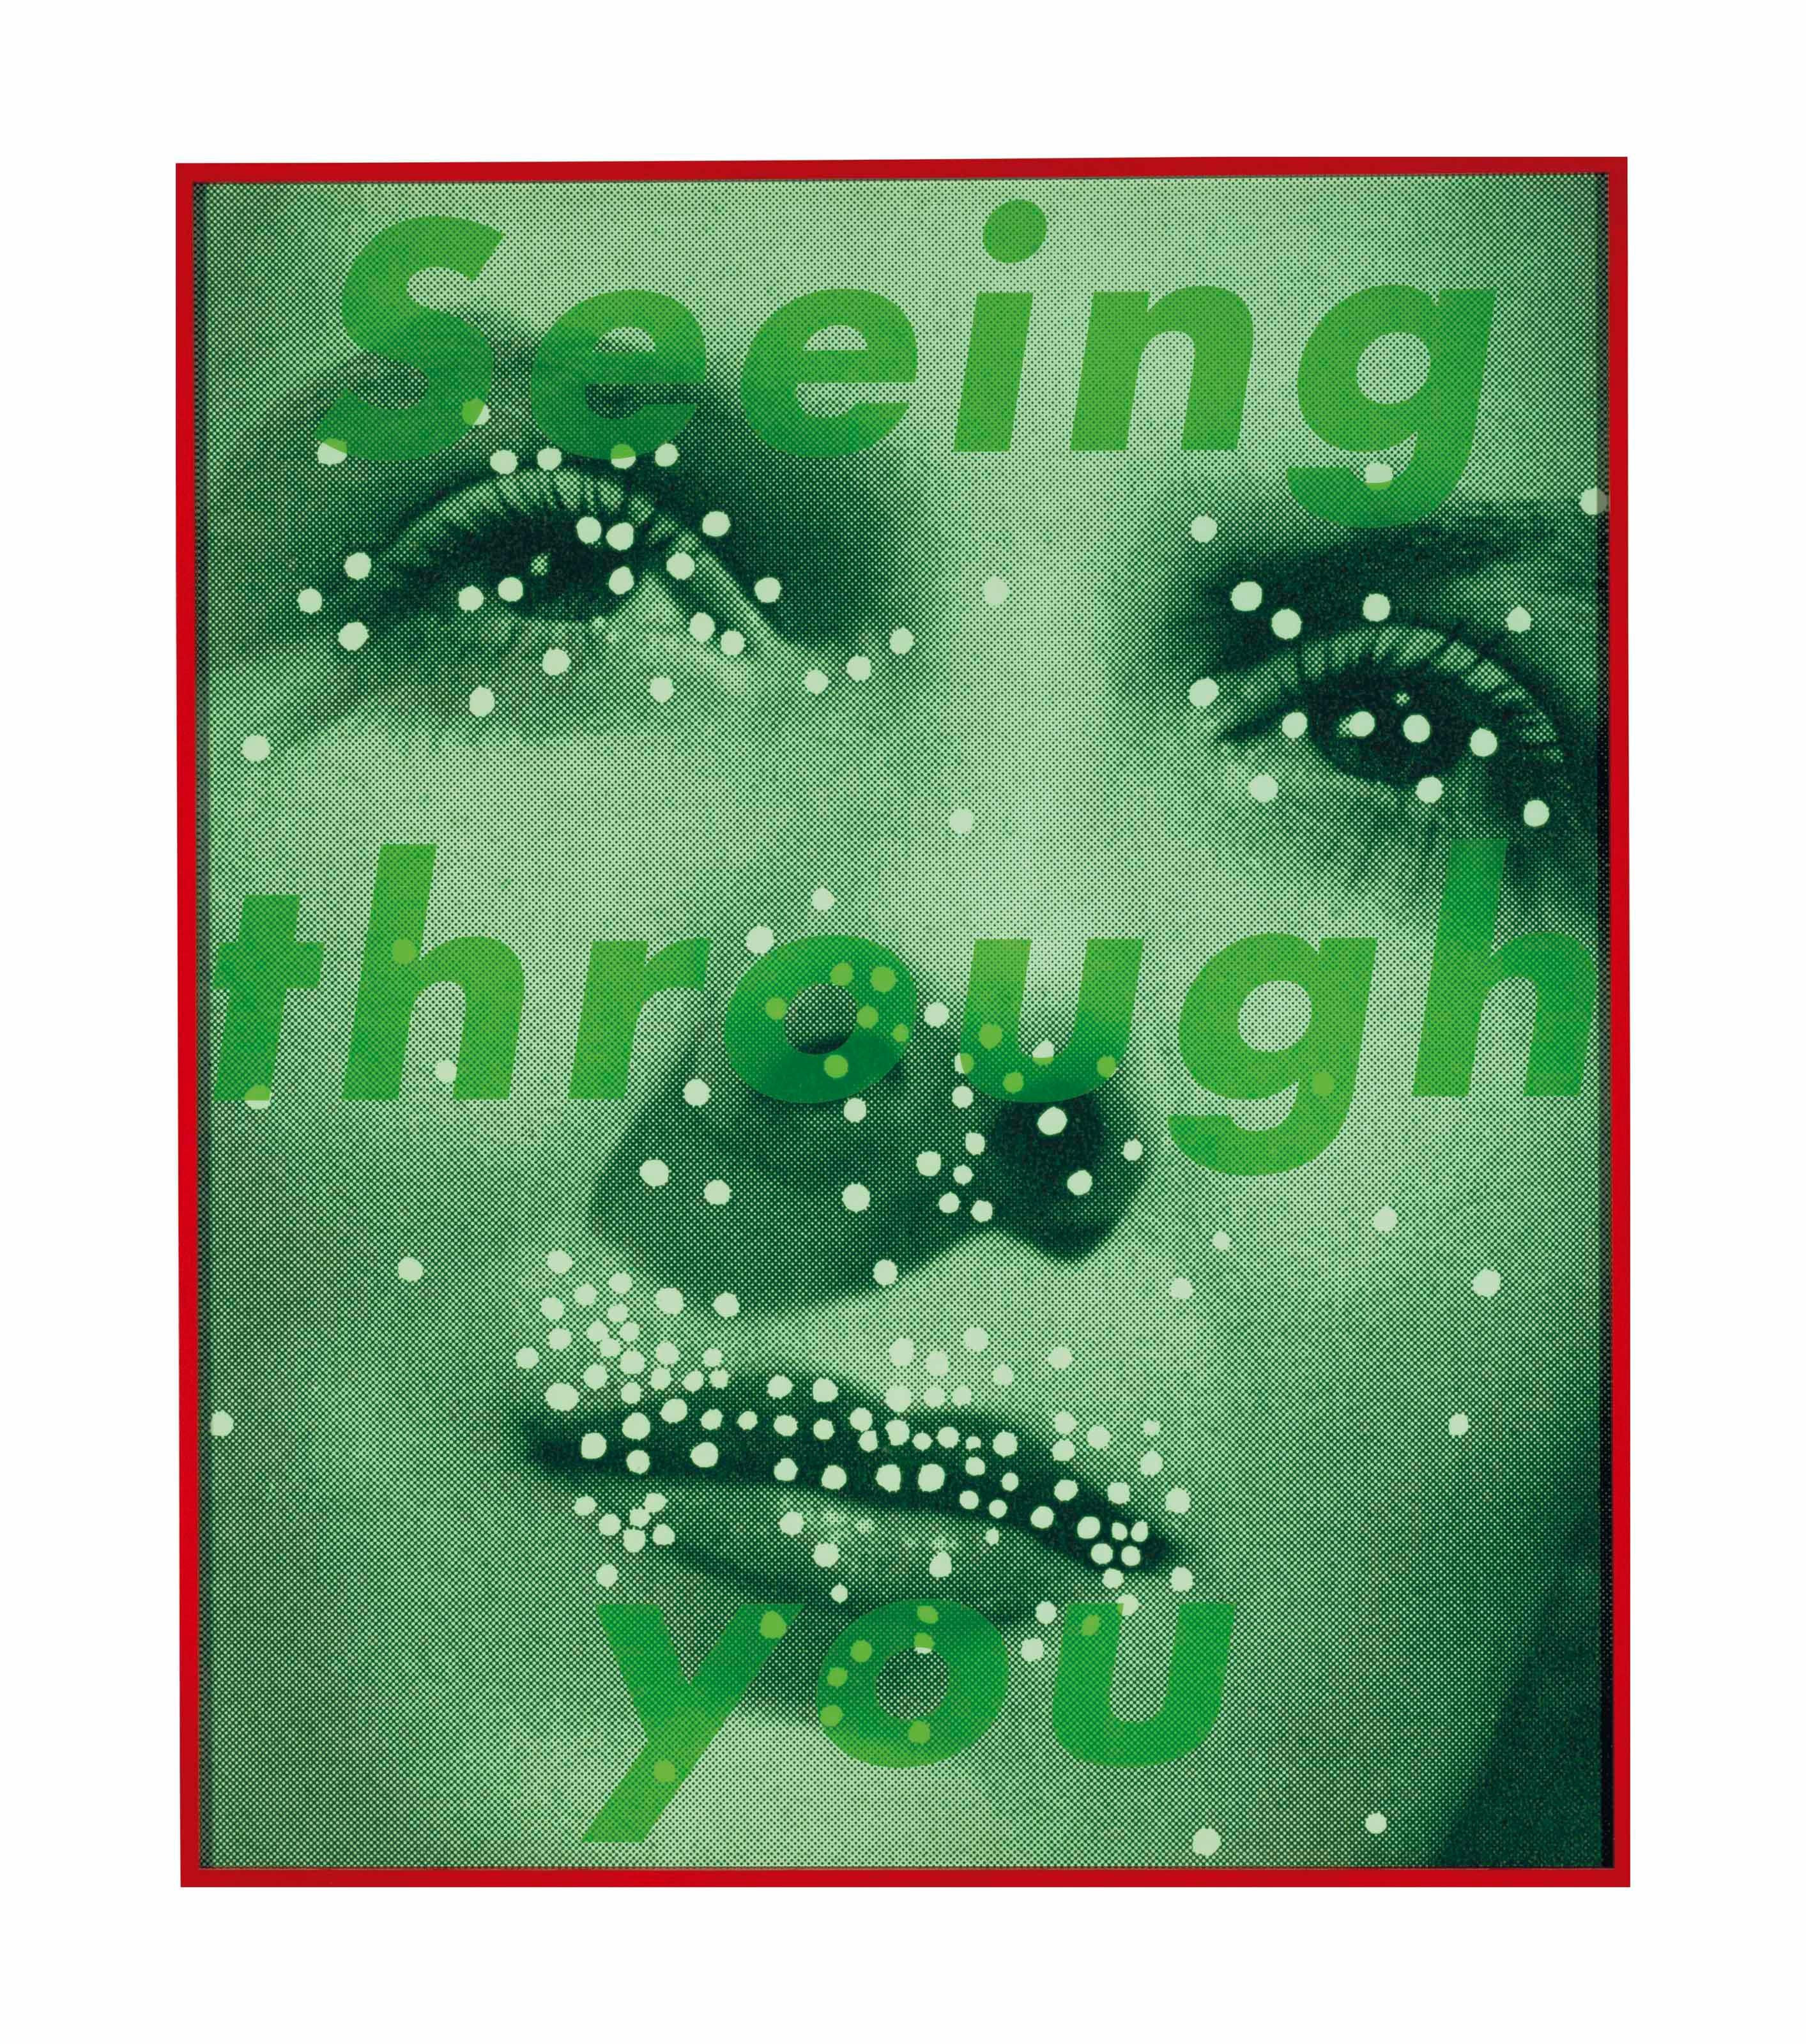 Untitled (Seeing through you) - Photograph by Barbara Kruger